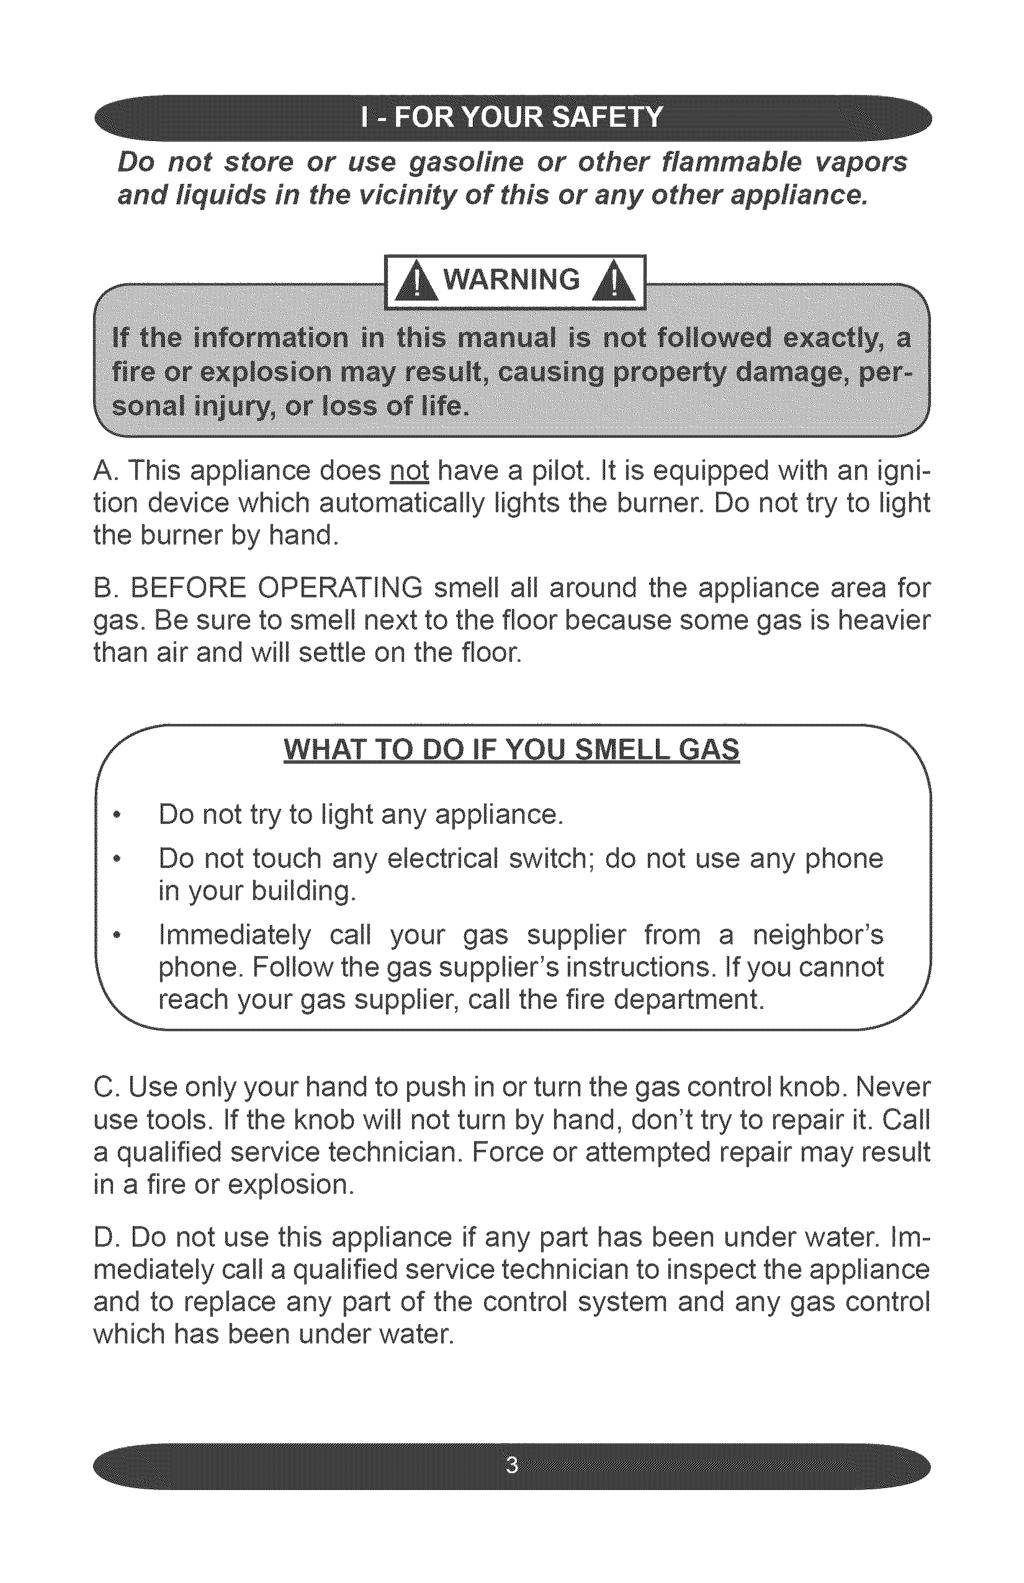 Do not store or use gasoline or other flammable vapors and liquids in the vicinity of this or any other appliance. A. This appliance does n have a pilot.